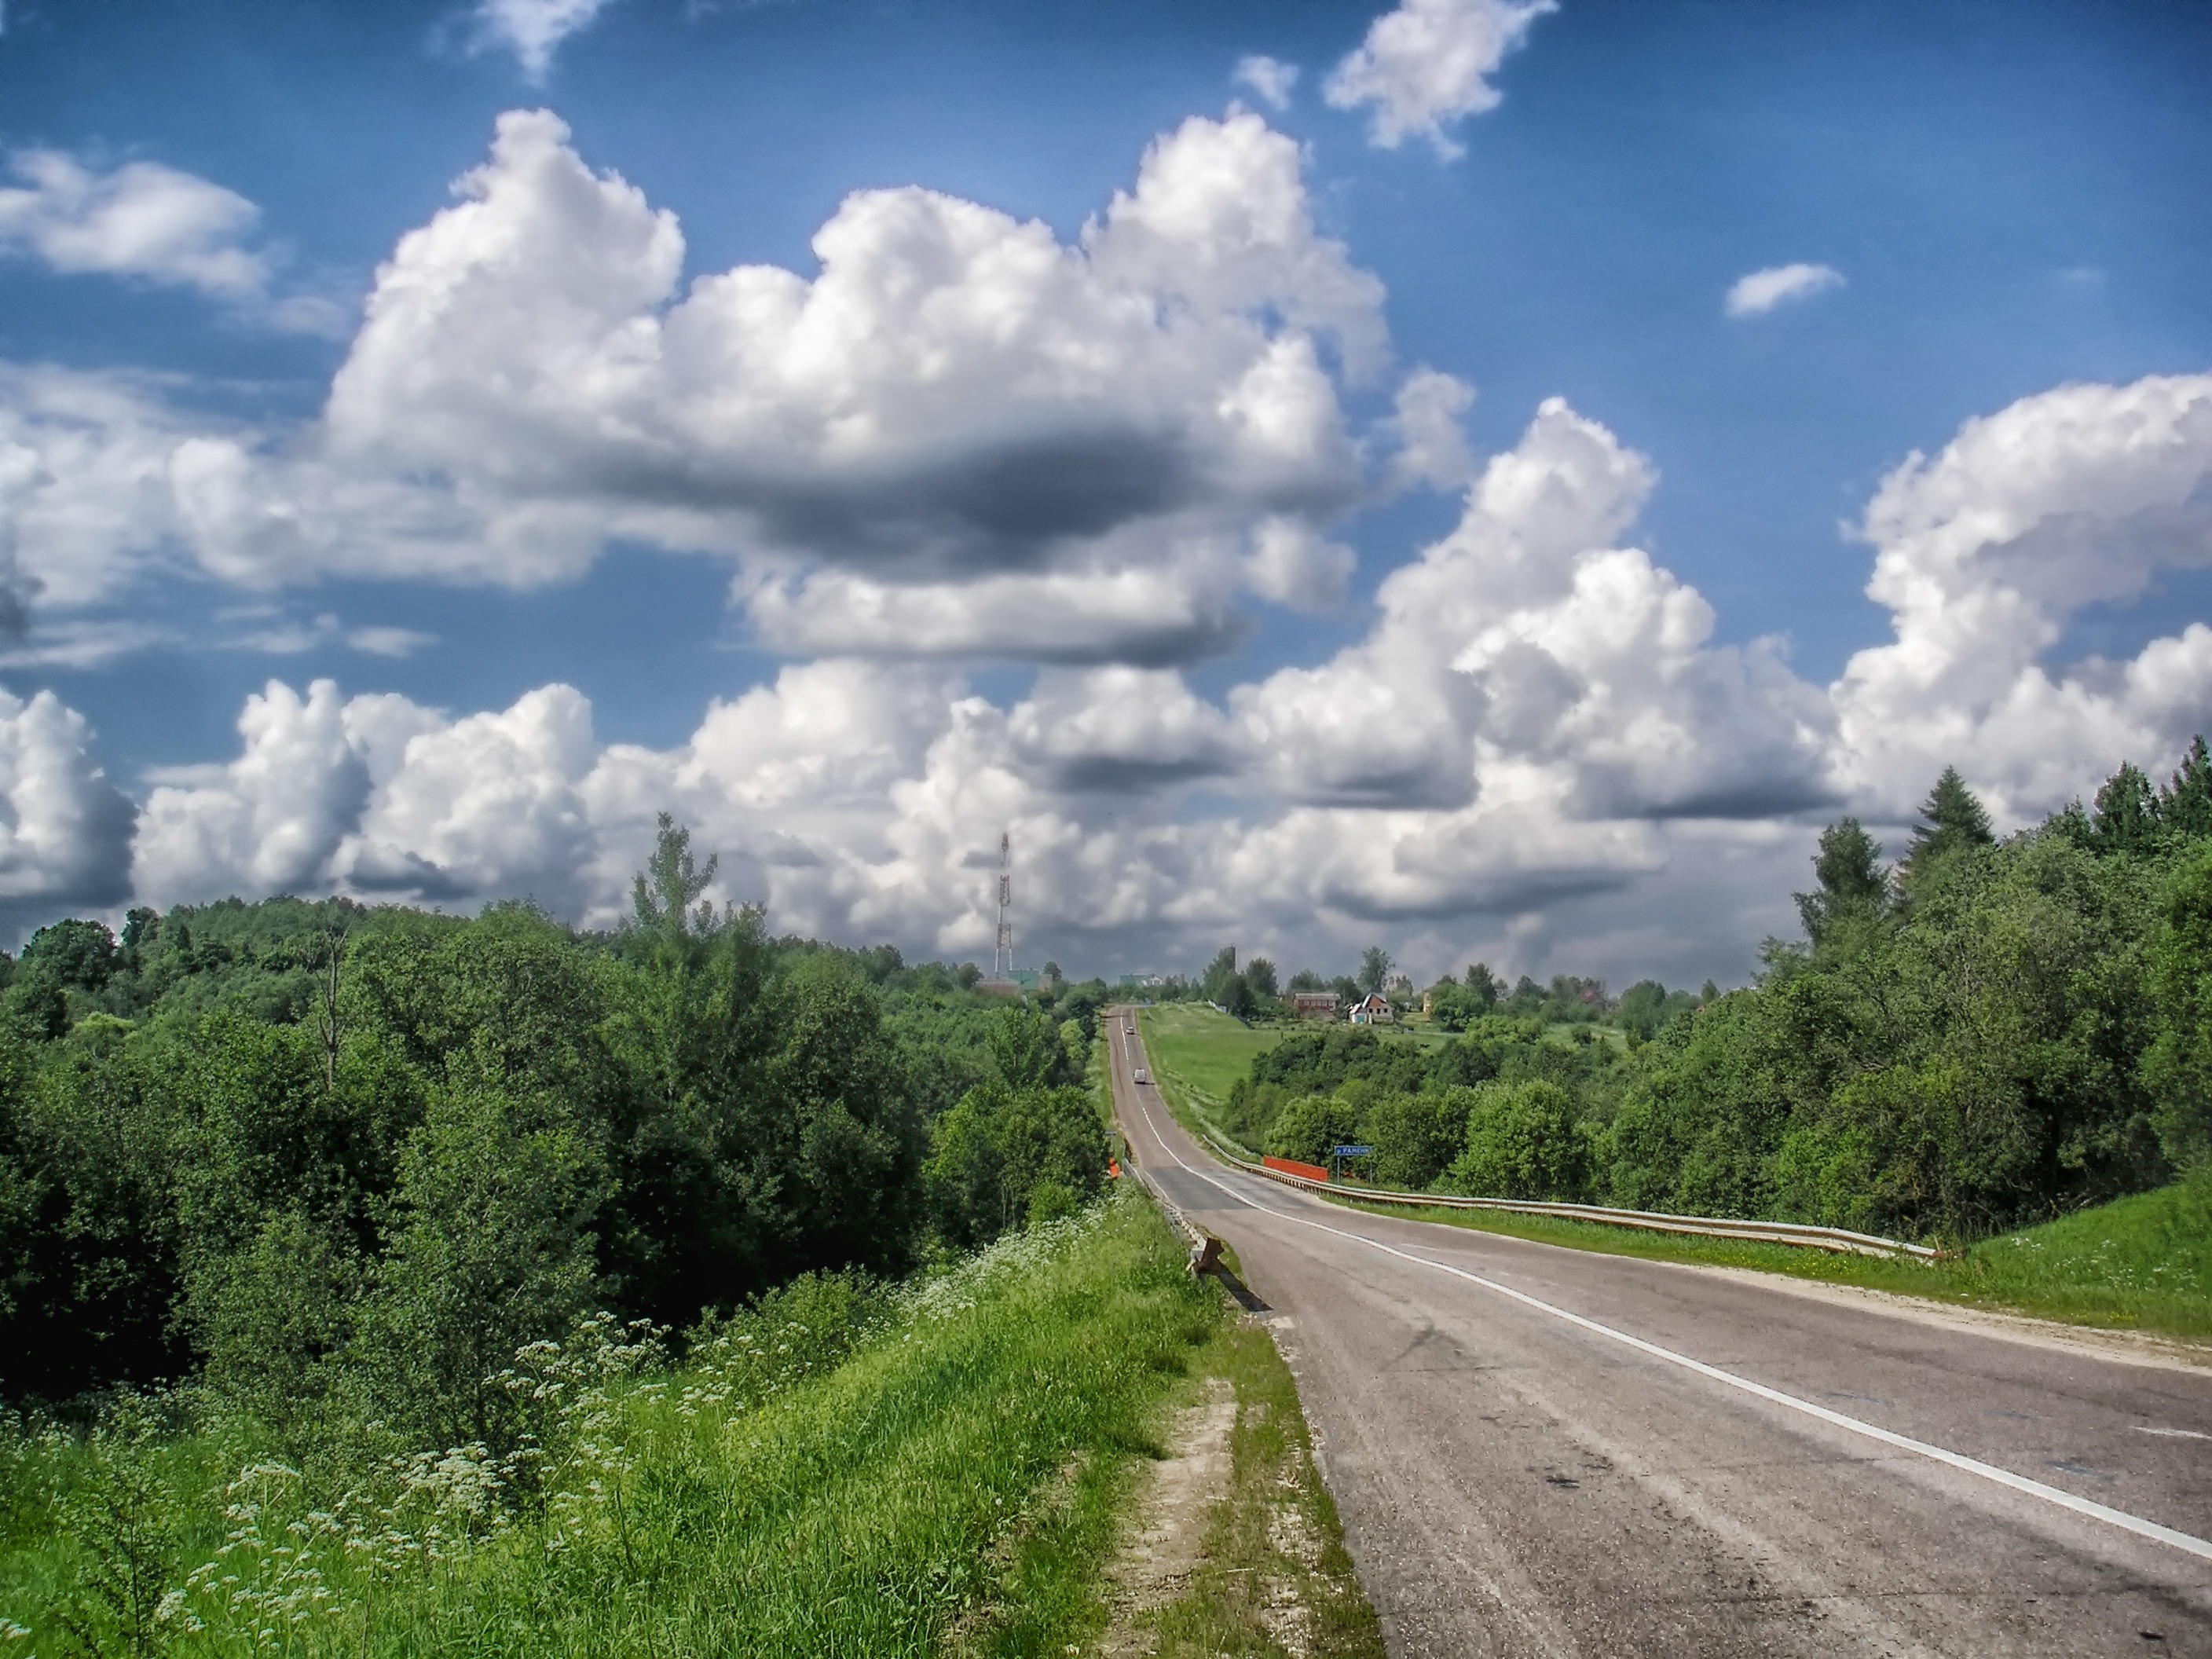 Landscape of road in countryside free image download